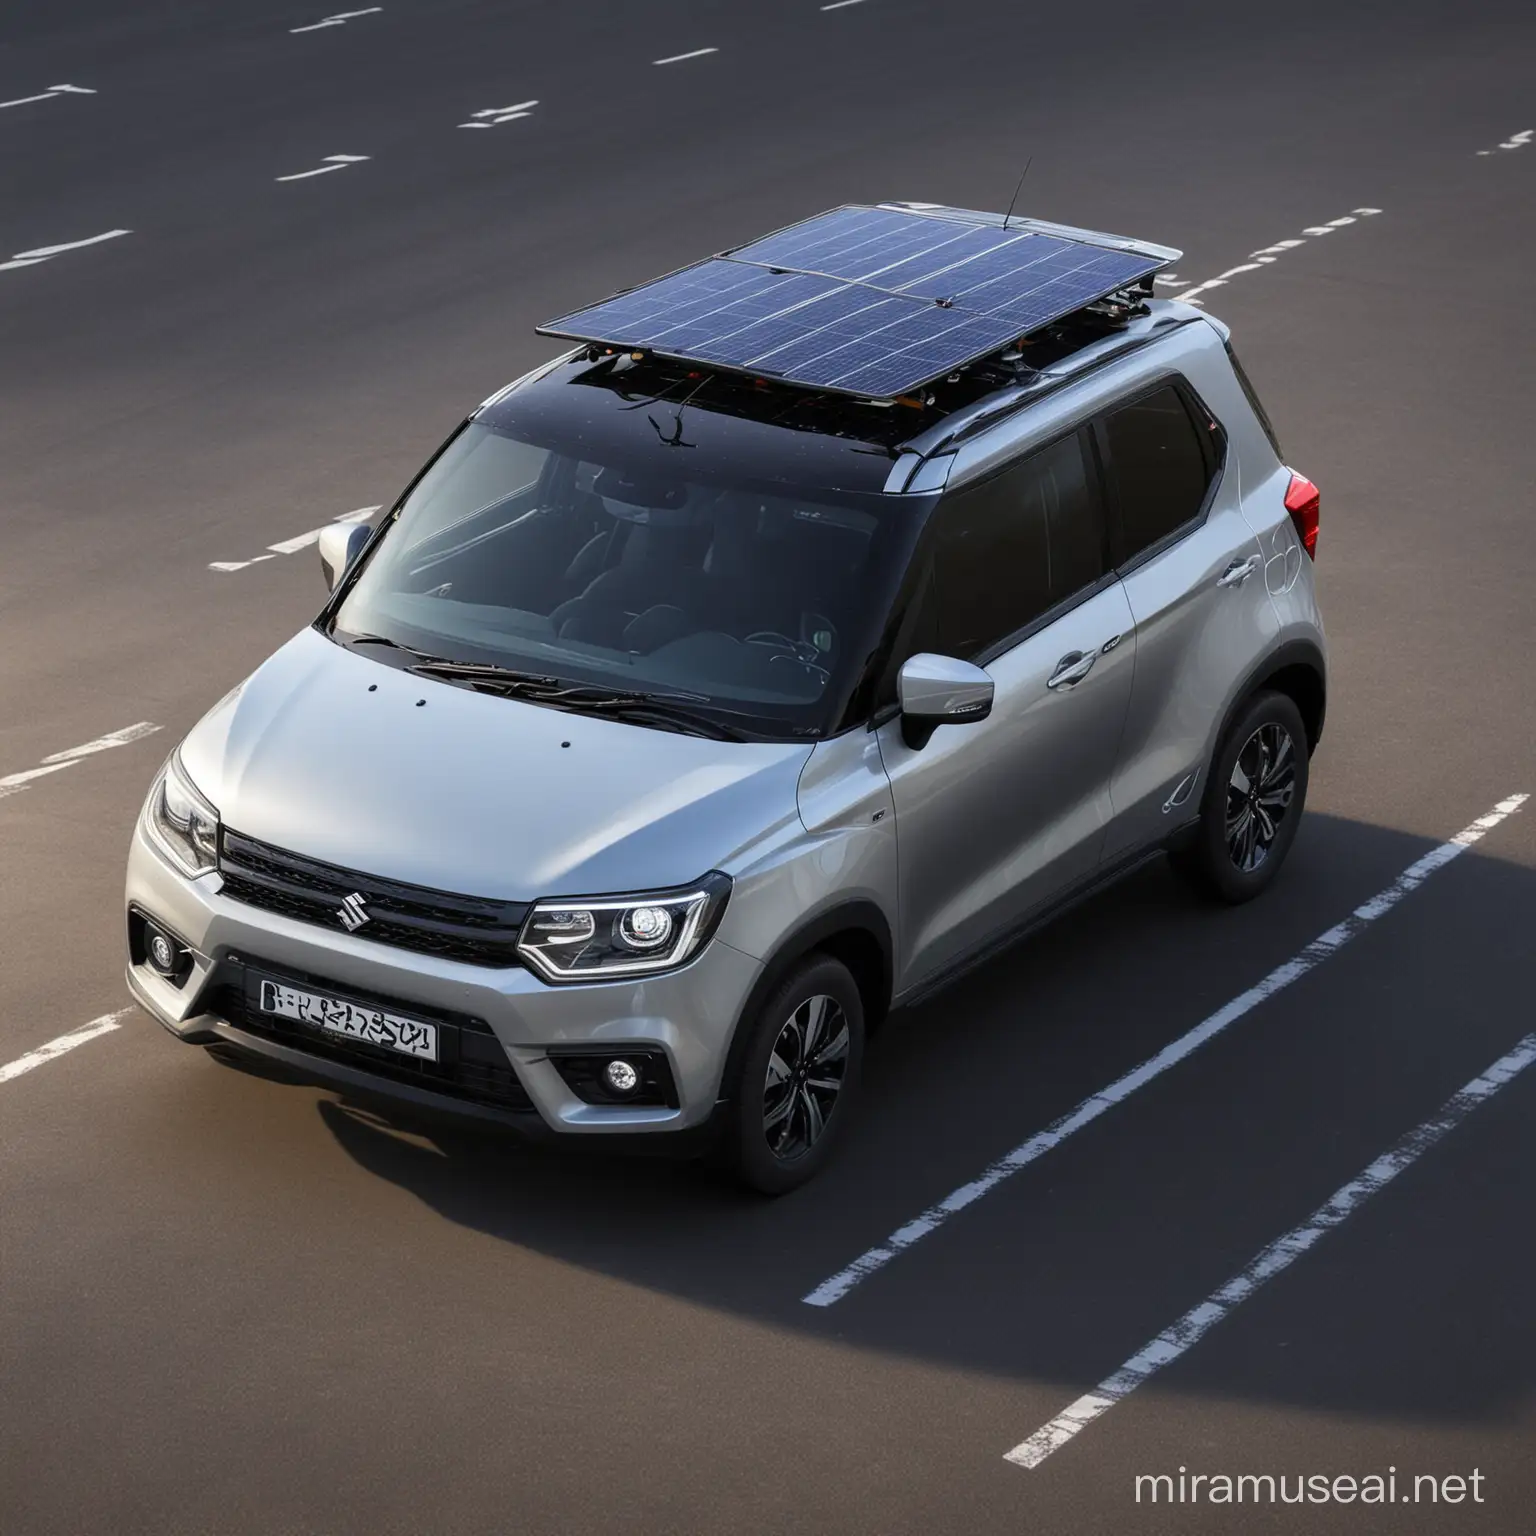 create an image of Maruti Suzuki Brezza with LED Headlights, solar panel attached parallel to roof of the car, carbon fibre body, driverless interior, parked near a EV Charging station